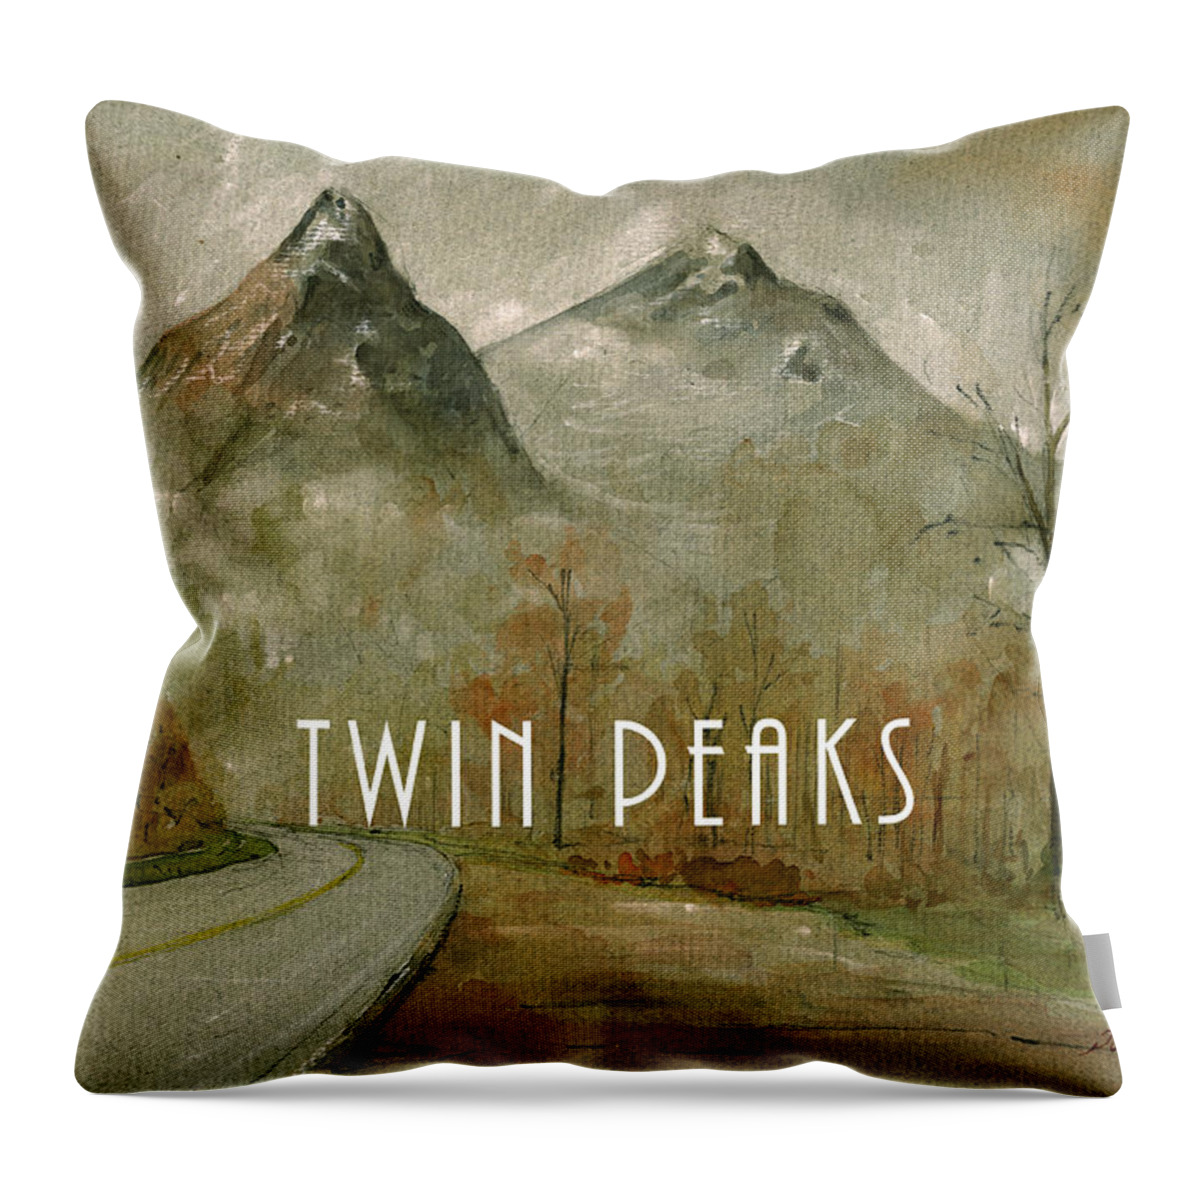 Twin Peaks Throw Pillow featuring the painting Twin Peaks poster painting by Juan Bosco